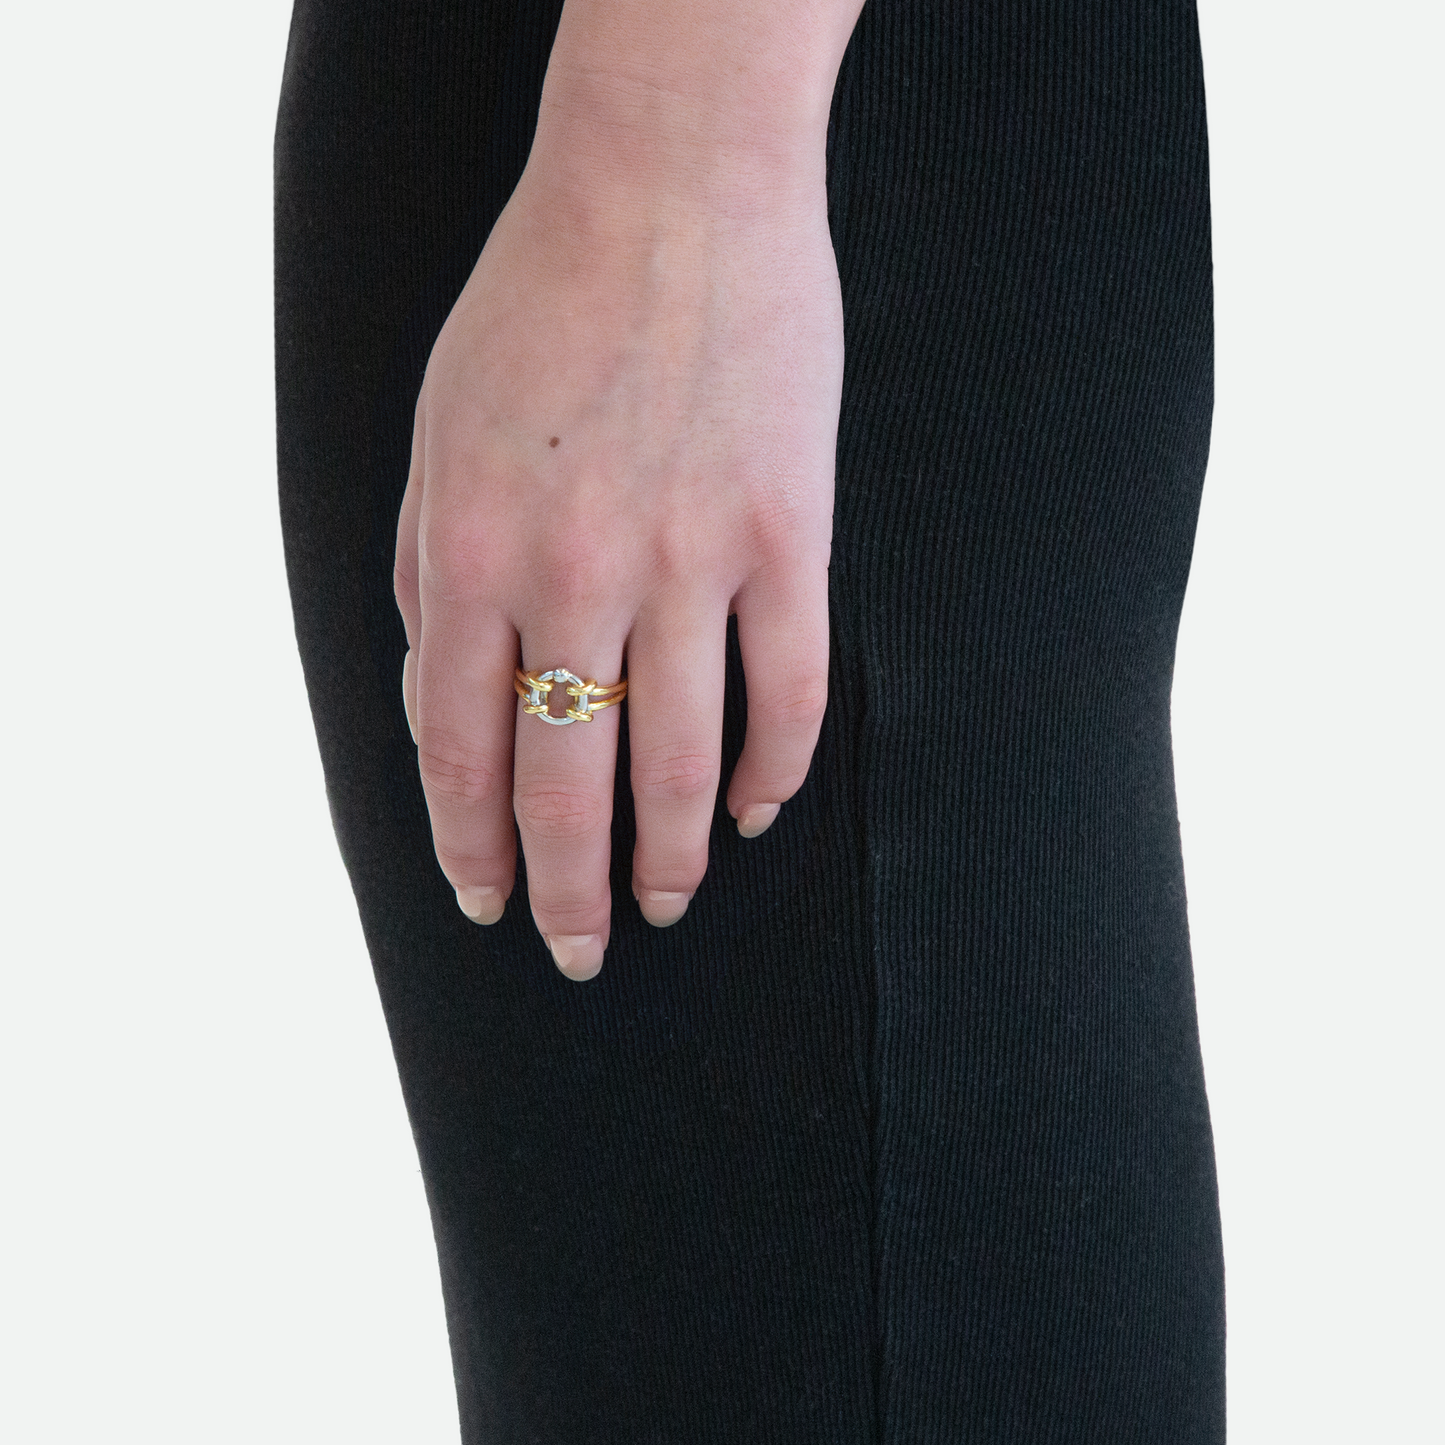 Side view of a model's hand wearing the Captive Ring, showcasing the silver O-shaped piercing encased within the contrasting golden loop, designed by Ruggeri.